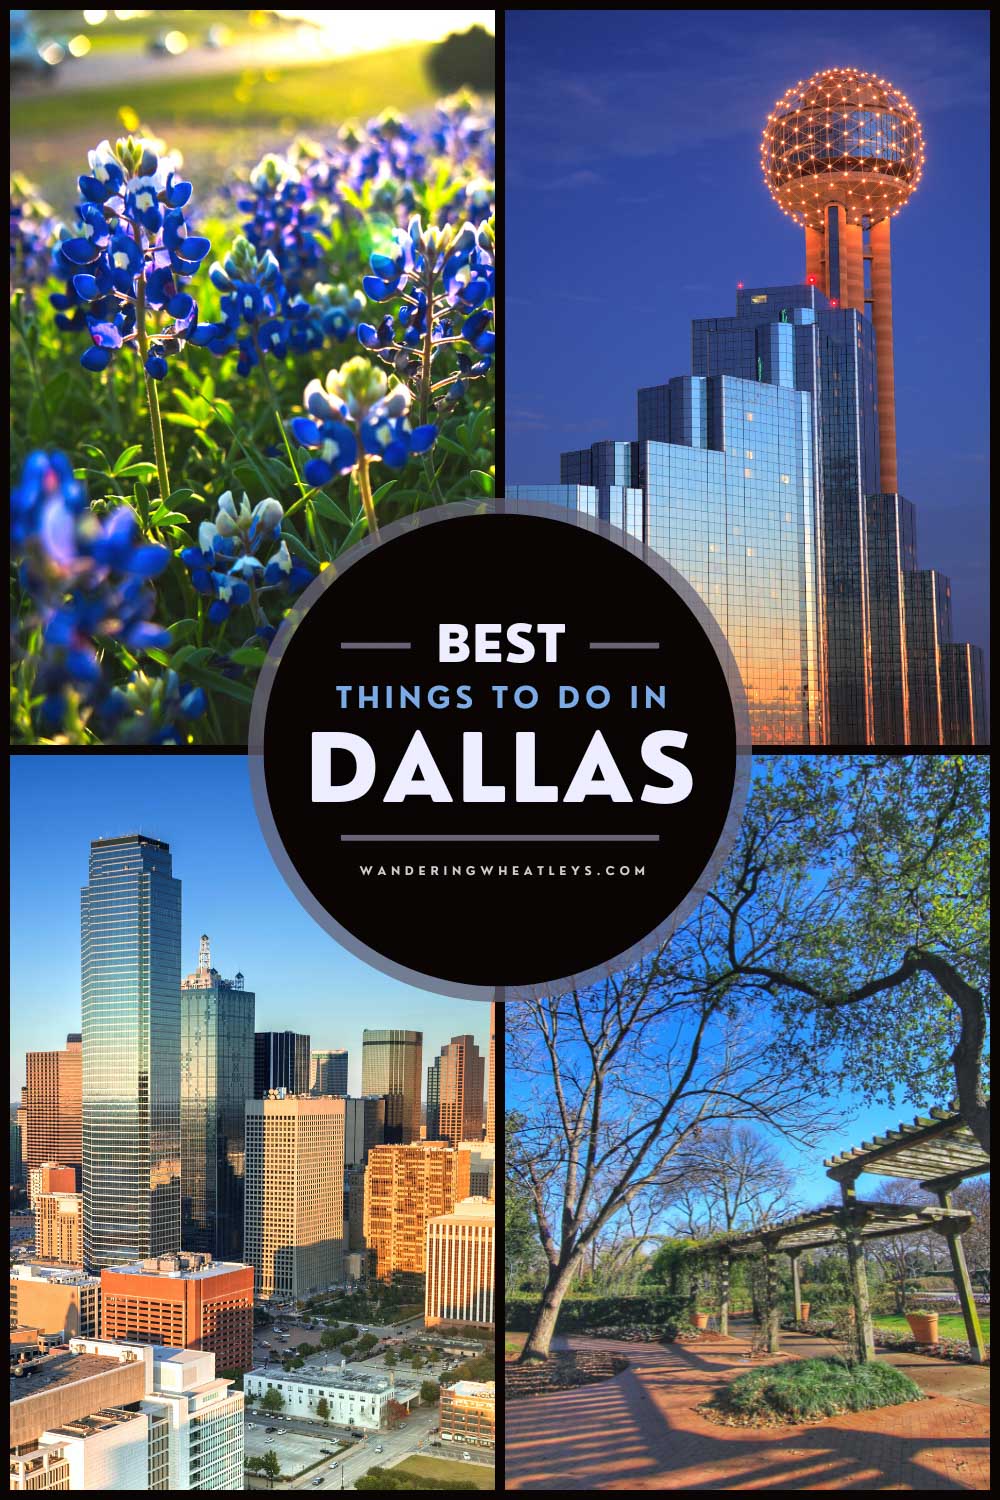 The Best Things to do in Dallas